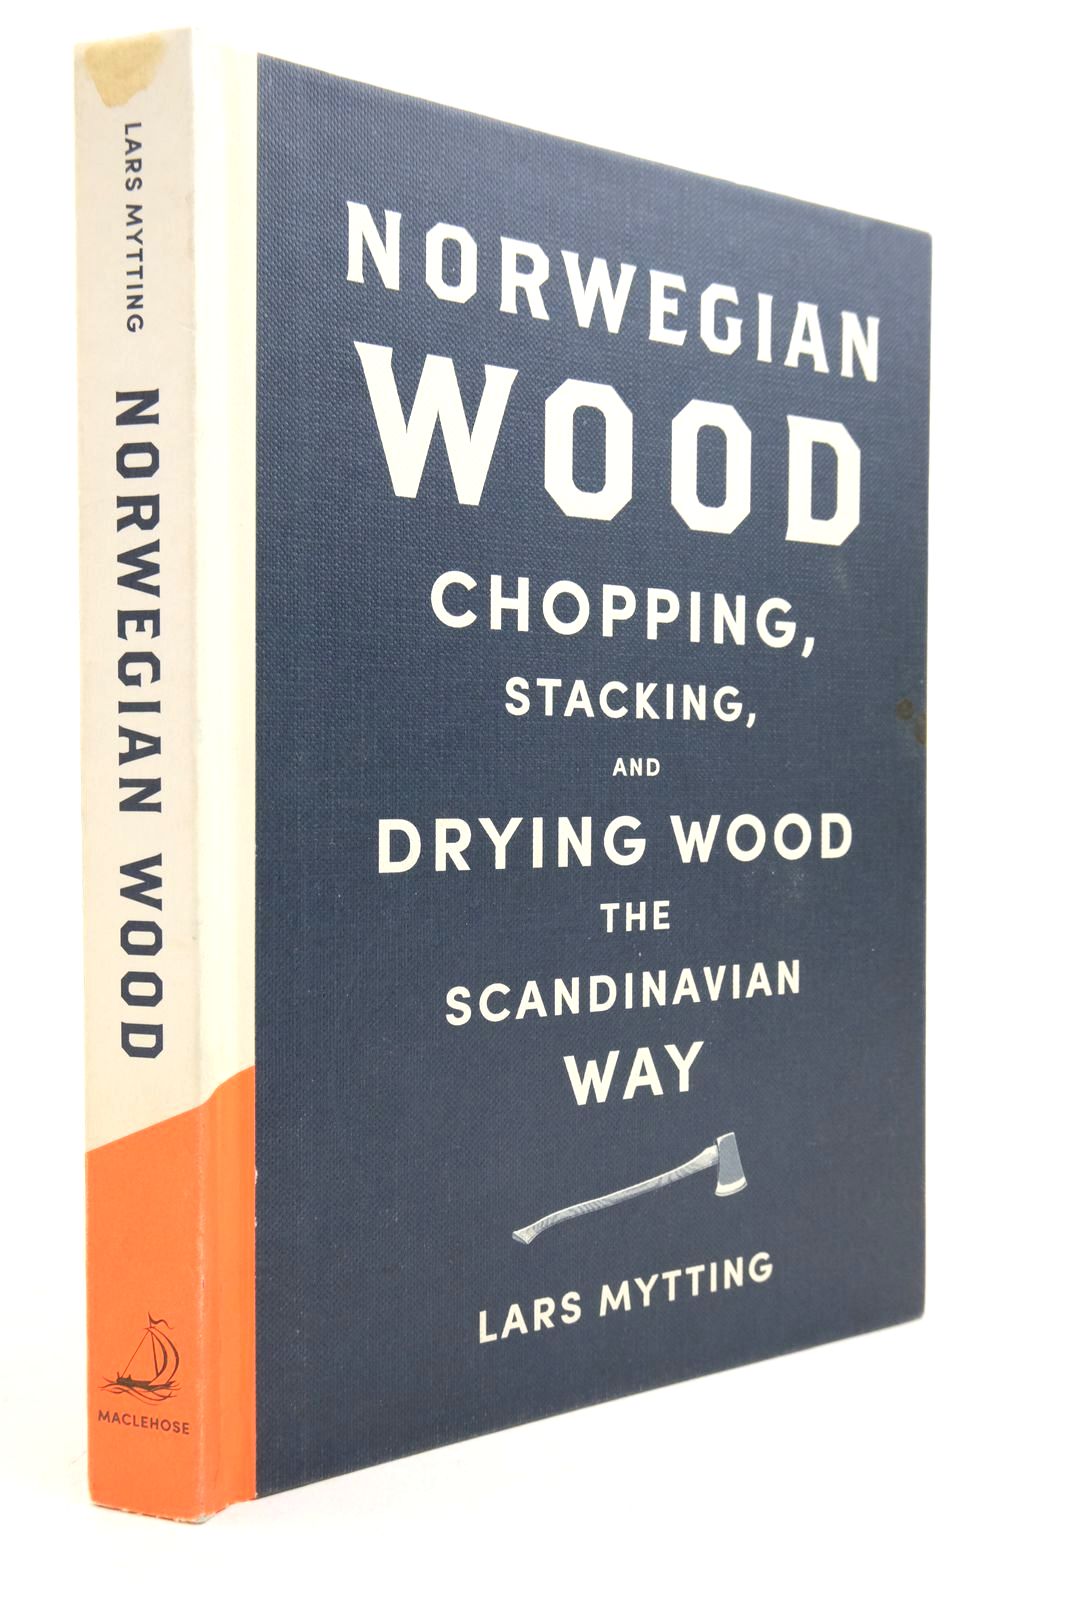 Photo of NORWEGIAN WOOD CHOPPING, STACKING, AND DRYING WOOD THE SCANDINAVIAN WAY written by Mytting, Lars published by Maclehose Press (STOCK CODE: 2140723)  for sale by Stella & Rose's Books